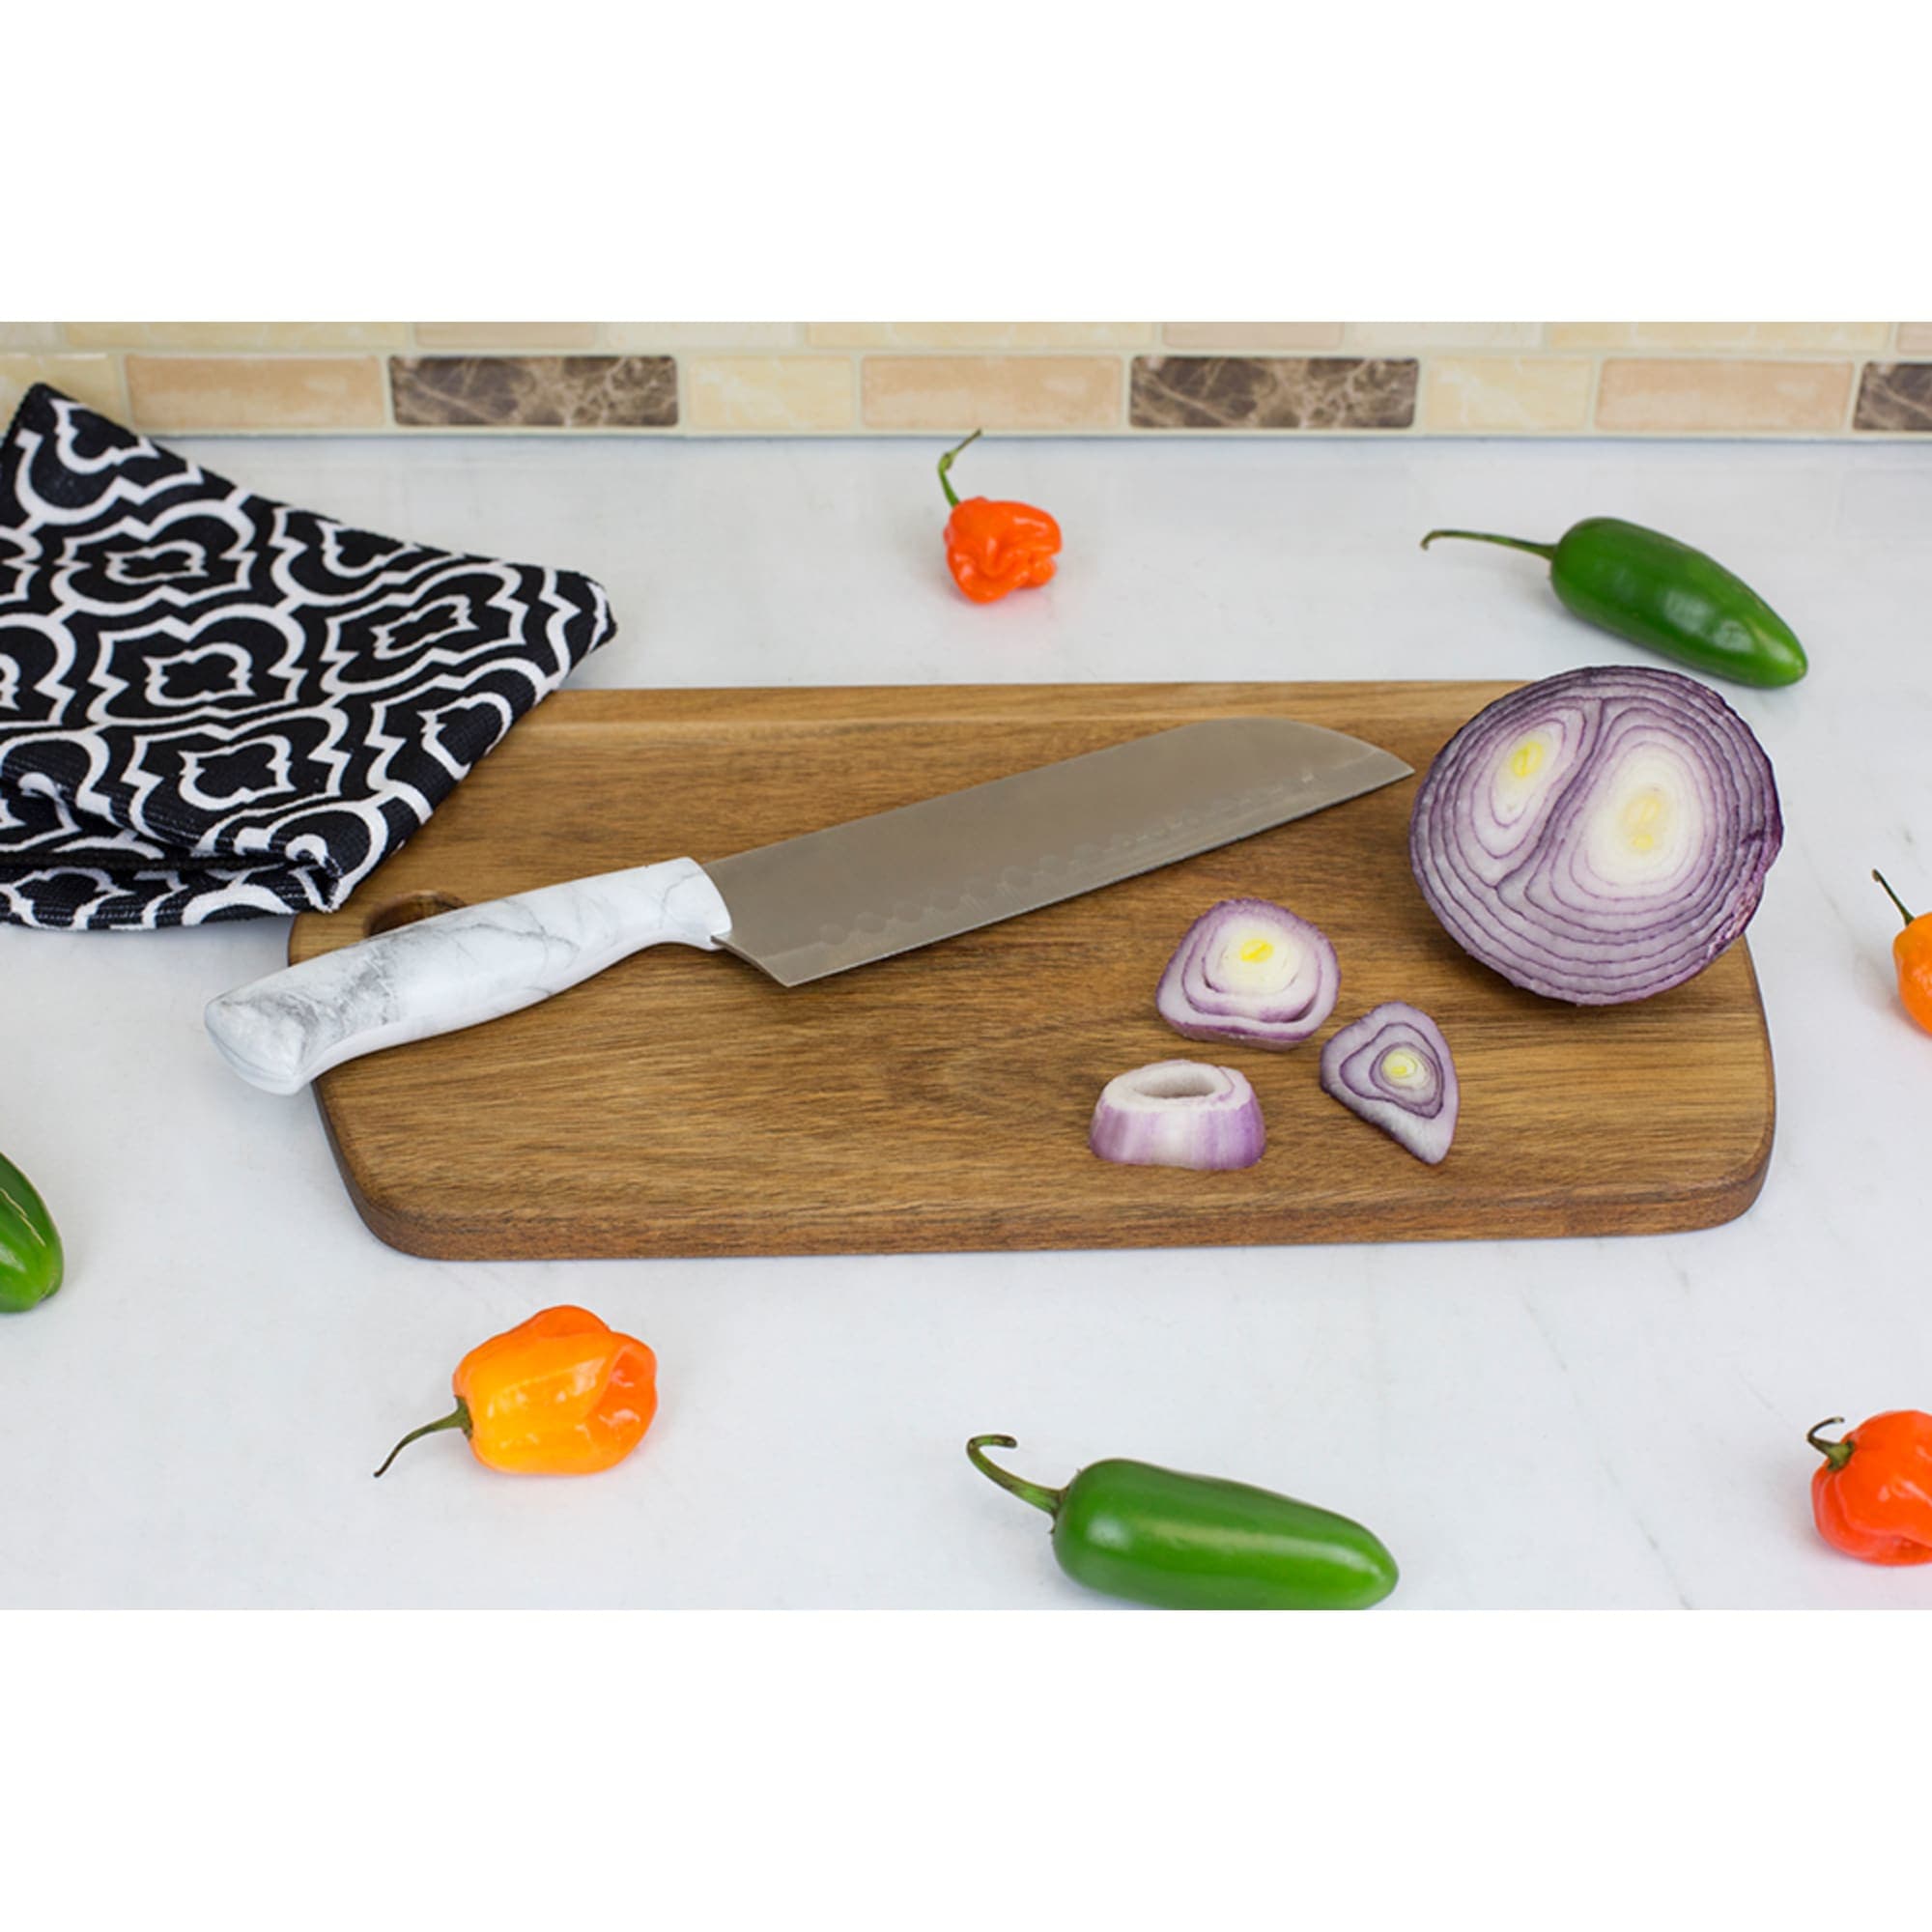 Home Basics Marble Collection 6" Santoku Knife, White $3 EACH, CASE PACK OF 24